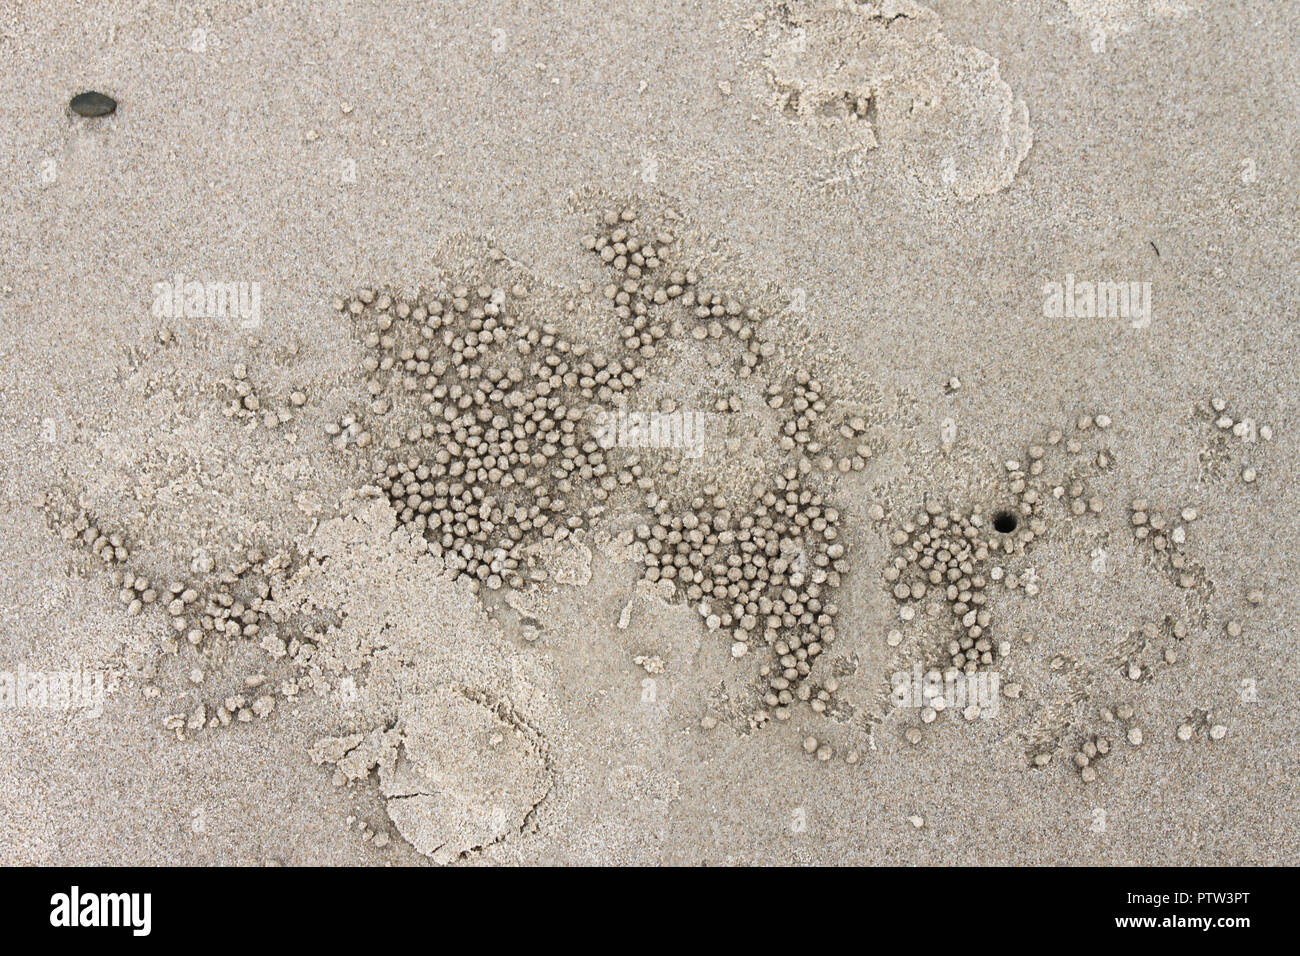 Little balls and holes in the sand at the beach where fidler crabs have been -background Stock Photo